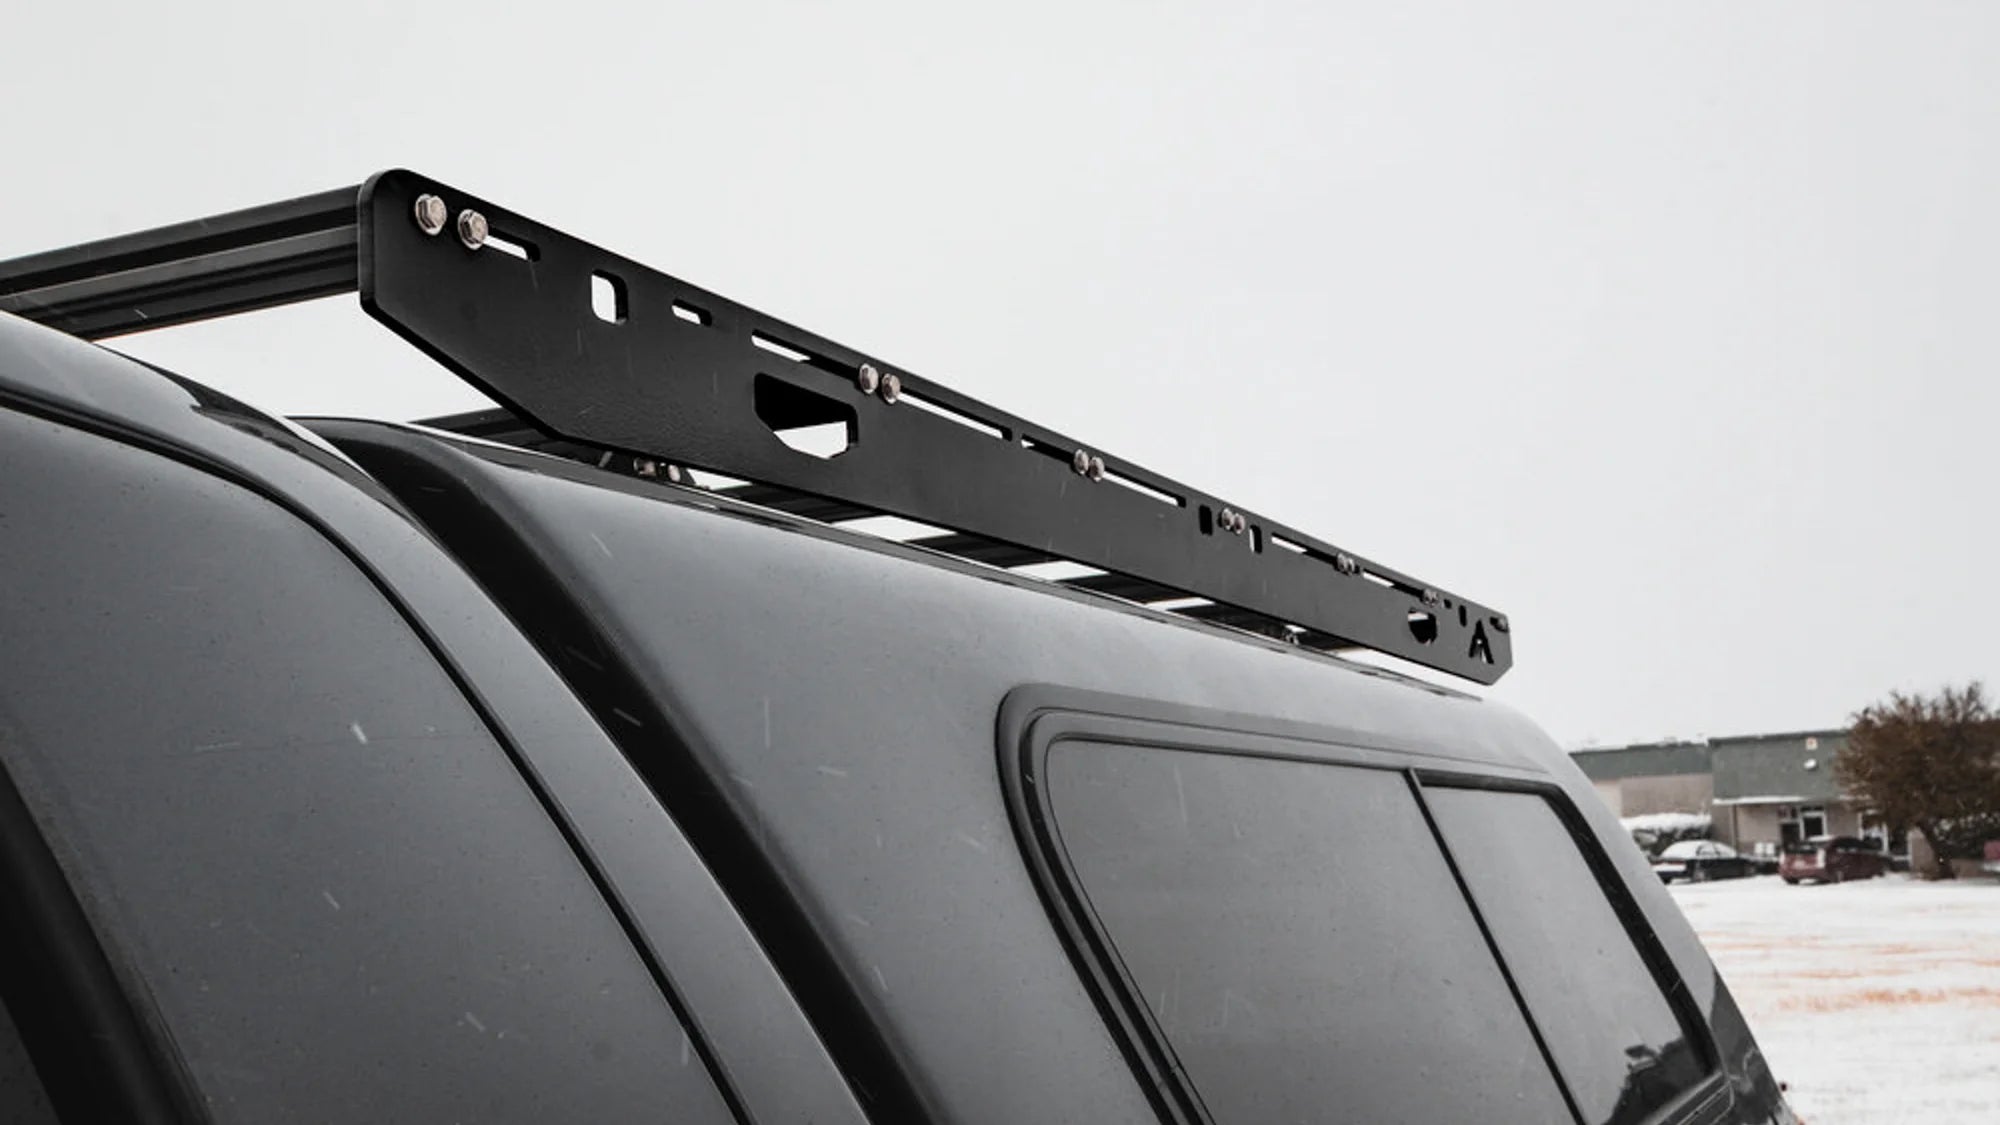 Sherpa Equipment Co - The Crow's Nest (Universal Truck Topper Rack)